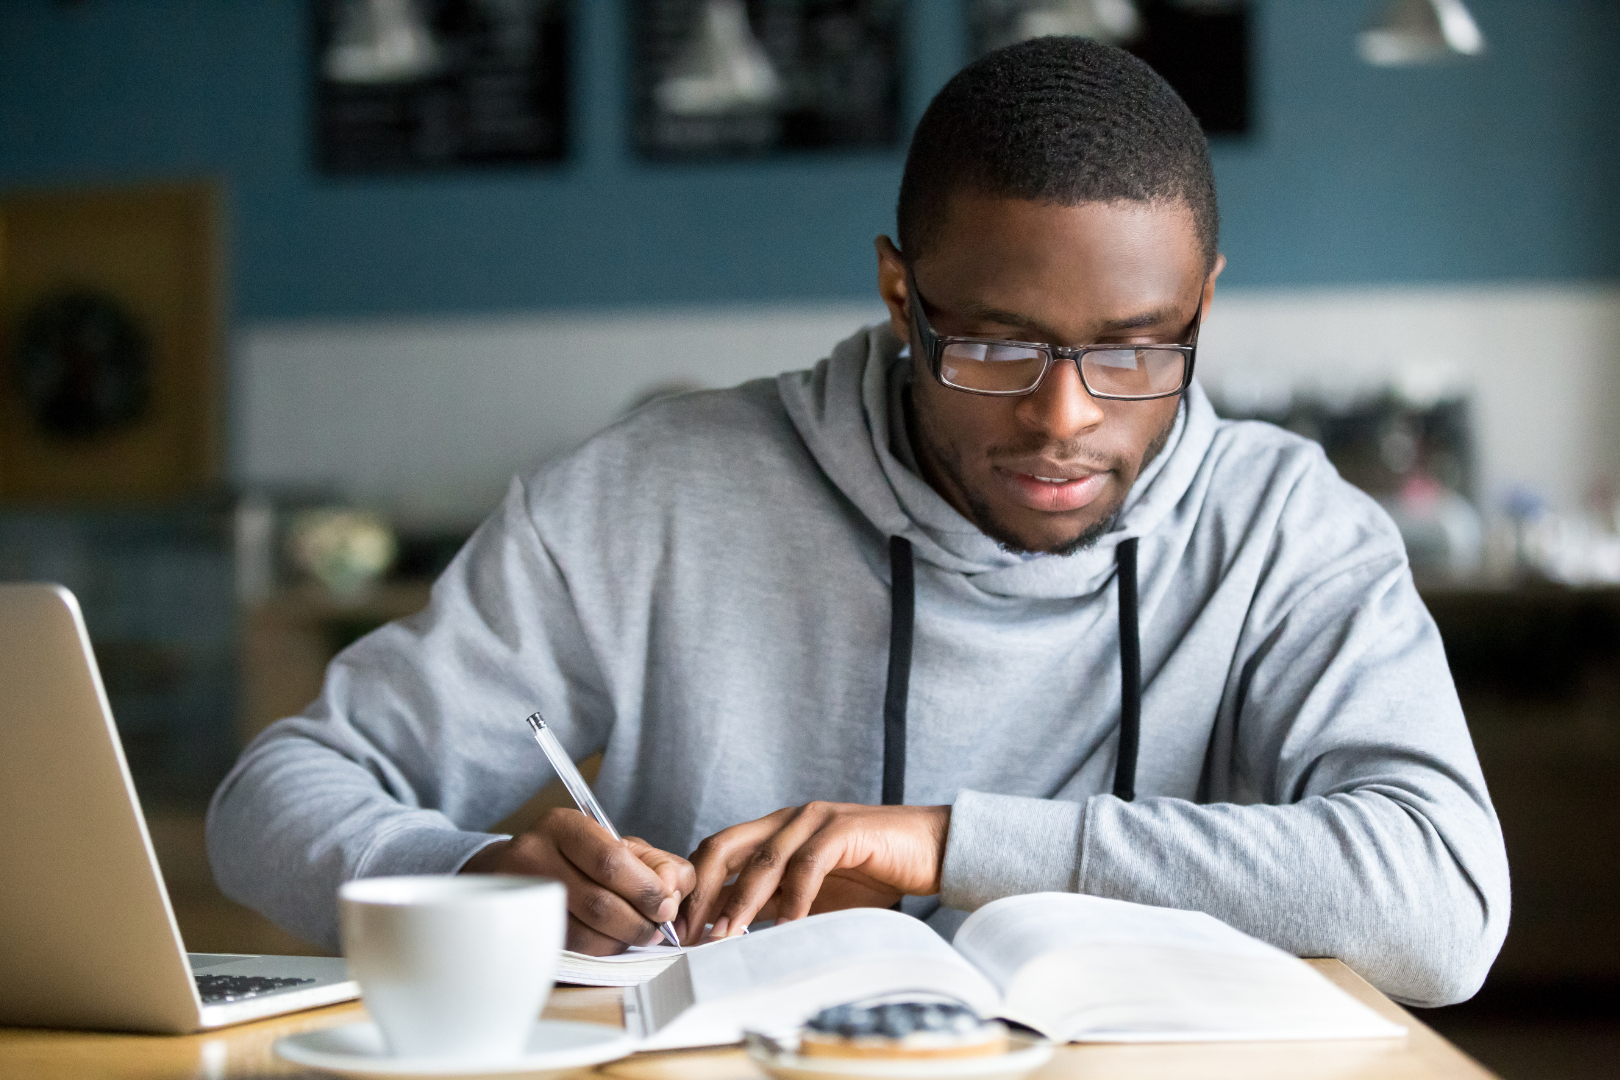 Black man with glasses and wearing a grey athletic sweatshirt. He is reading a book and writing down notes.